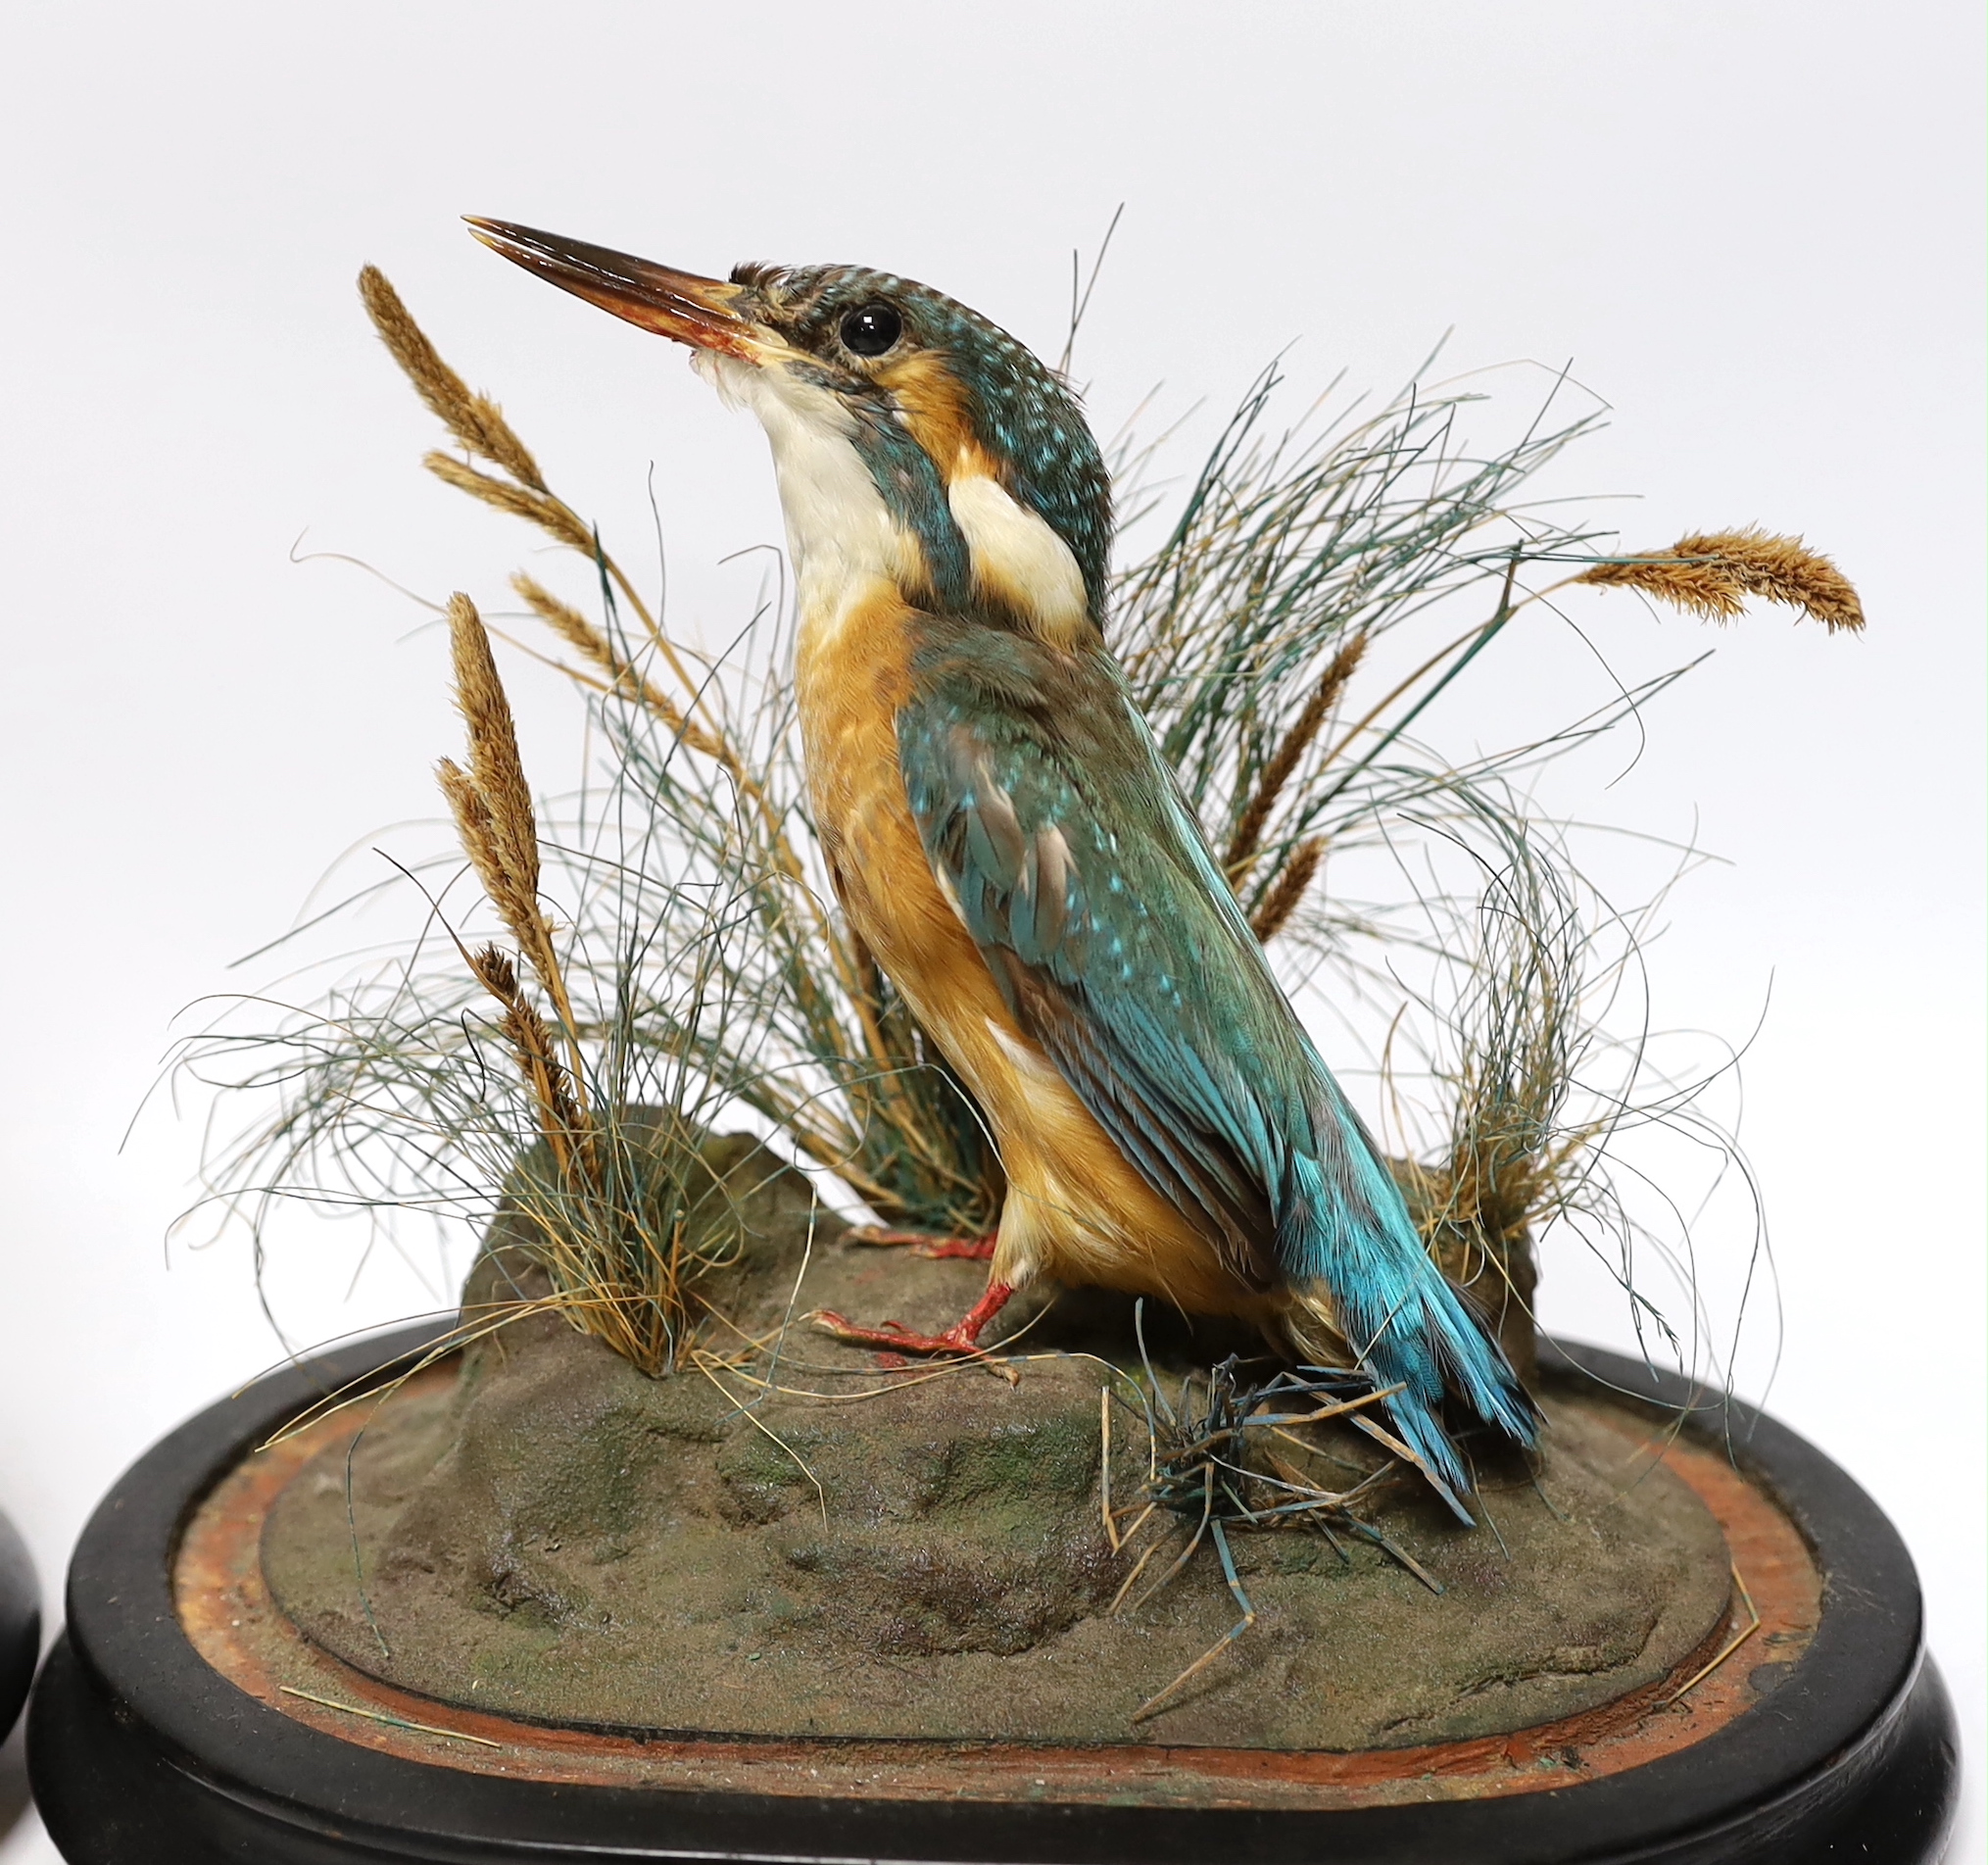 Two 19th century taxidermy birds under glass dome: a Kingfisher and a Great Spotted Woodpecker, 22cm high